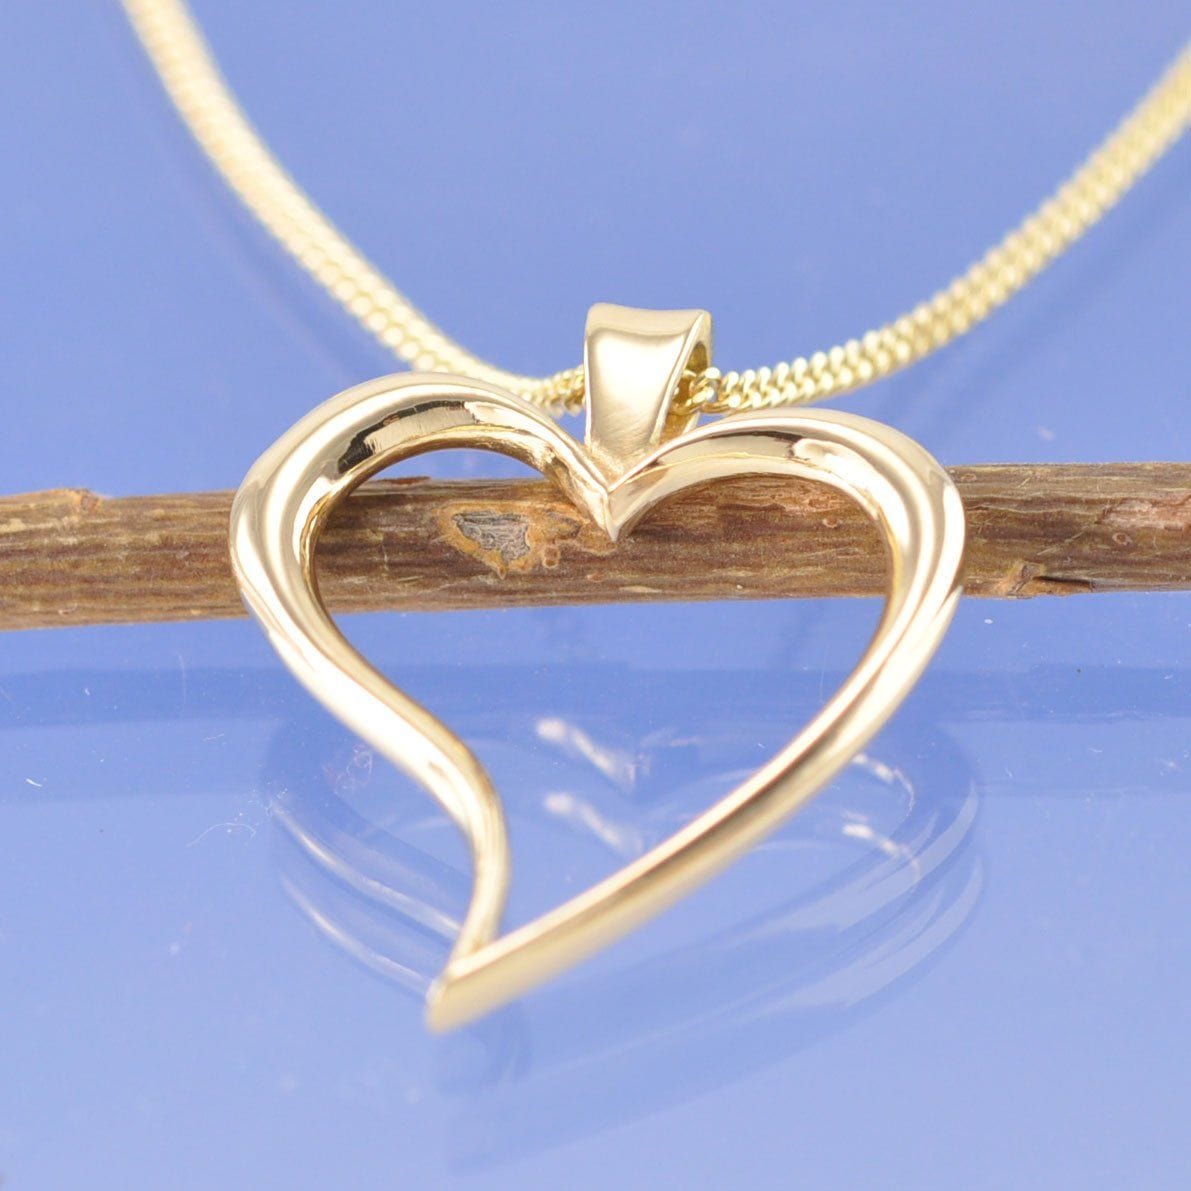 Personalised Heart Ring Keeper Necklace By aujune | notonthehighstreet.com